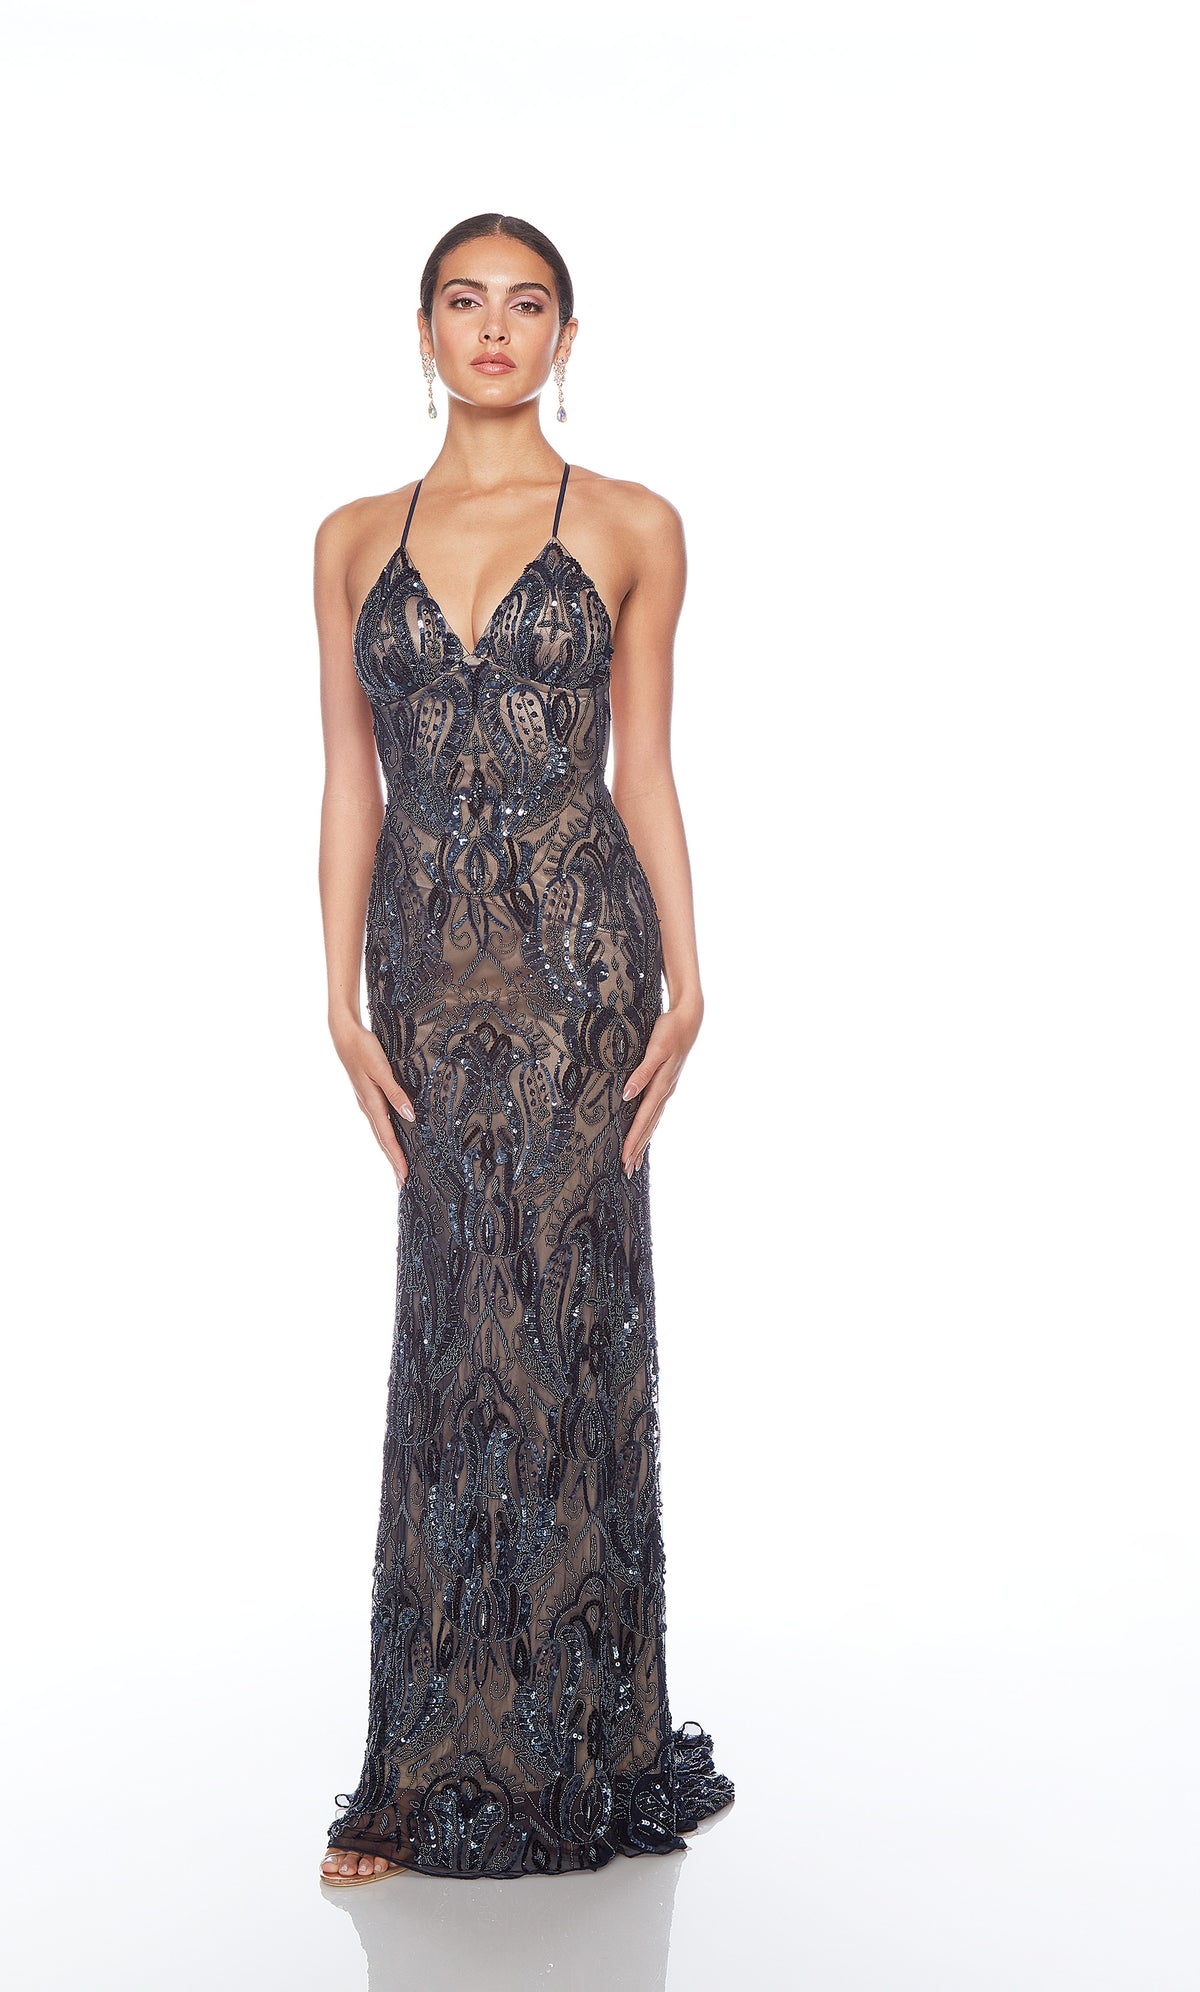 Elegant midnight-nude formal gown: Hand-beaded, V neckline, spaghetti straps, strappy back, and intricate paisley-patterned design for an chic and sophisticated look.